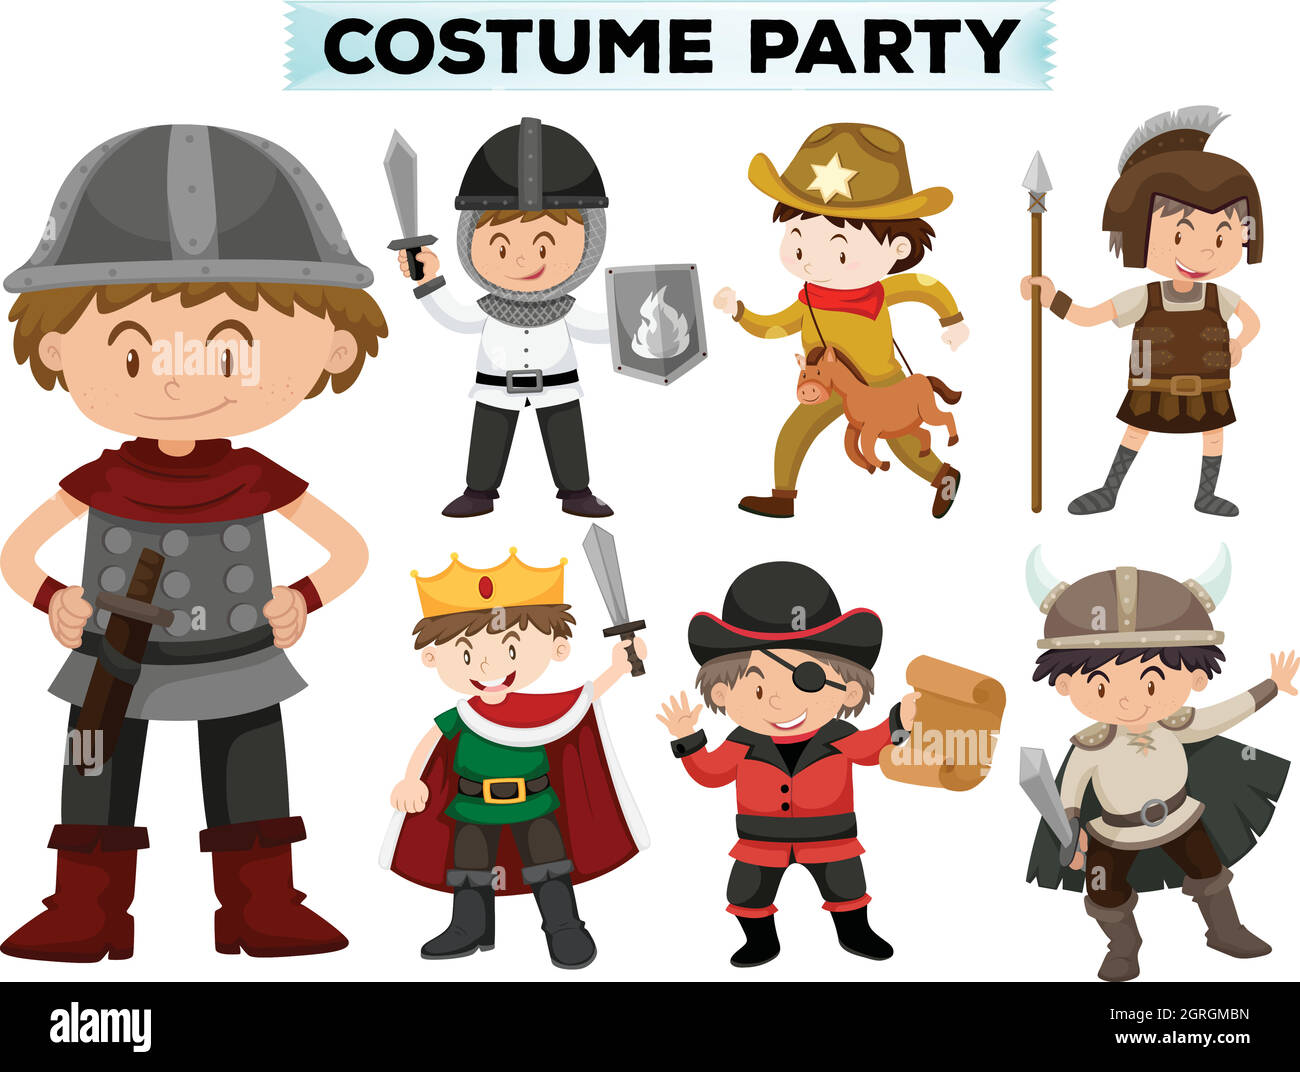 Costume party with boys in different costumes Stock Vector